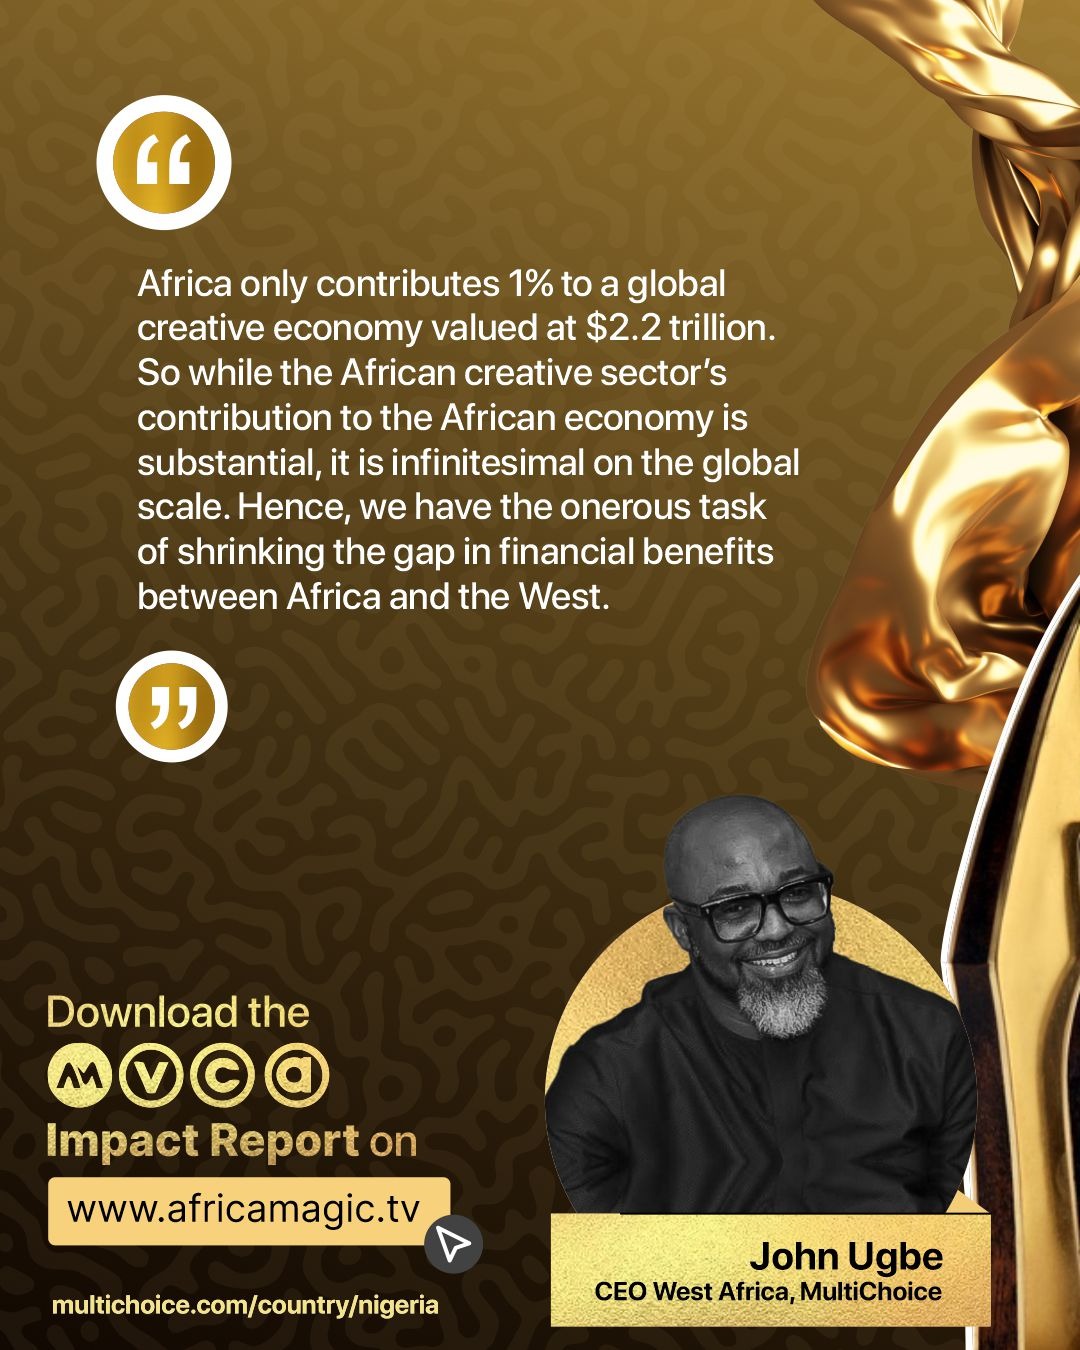 John Quote - Multichoice Reveals N9Billion Investment in AMVCA and Awards Impact Report On Film/TV Sector